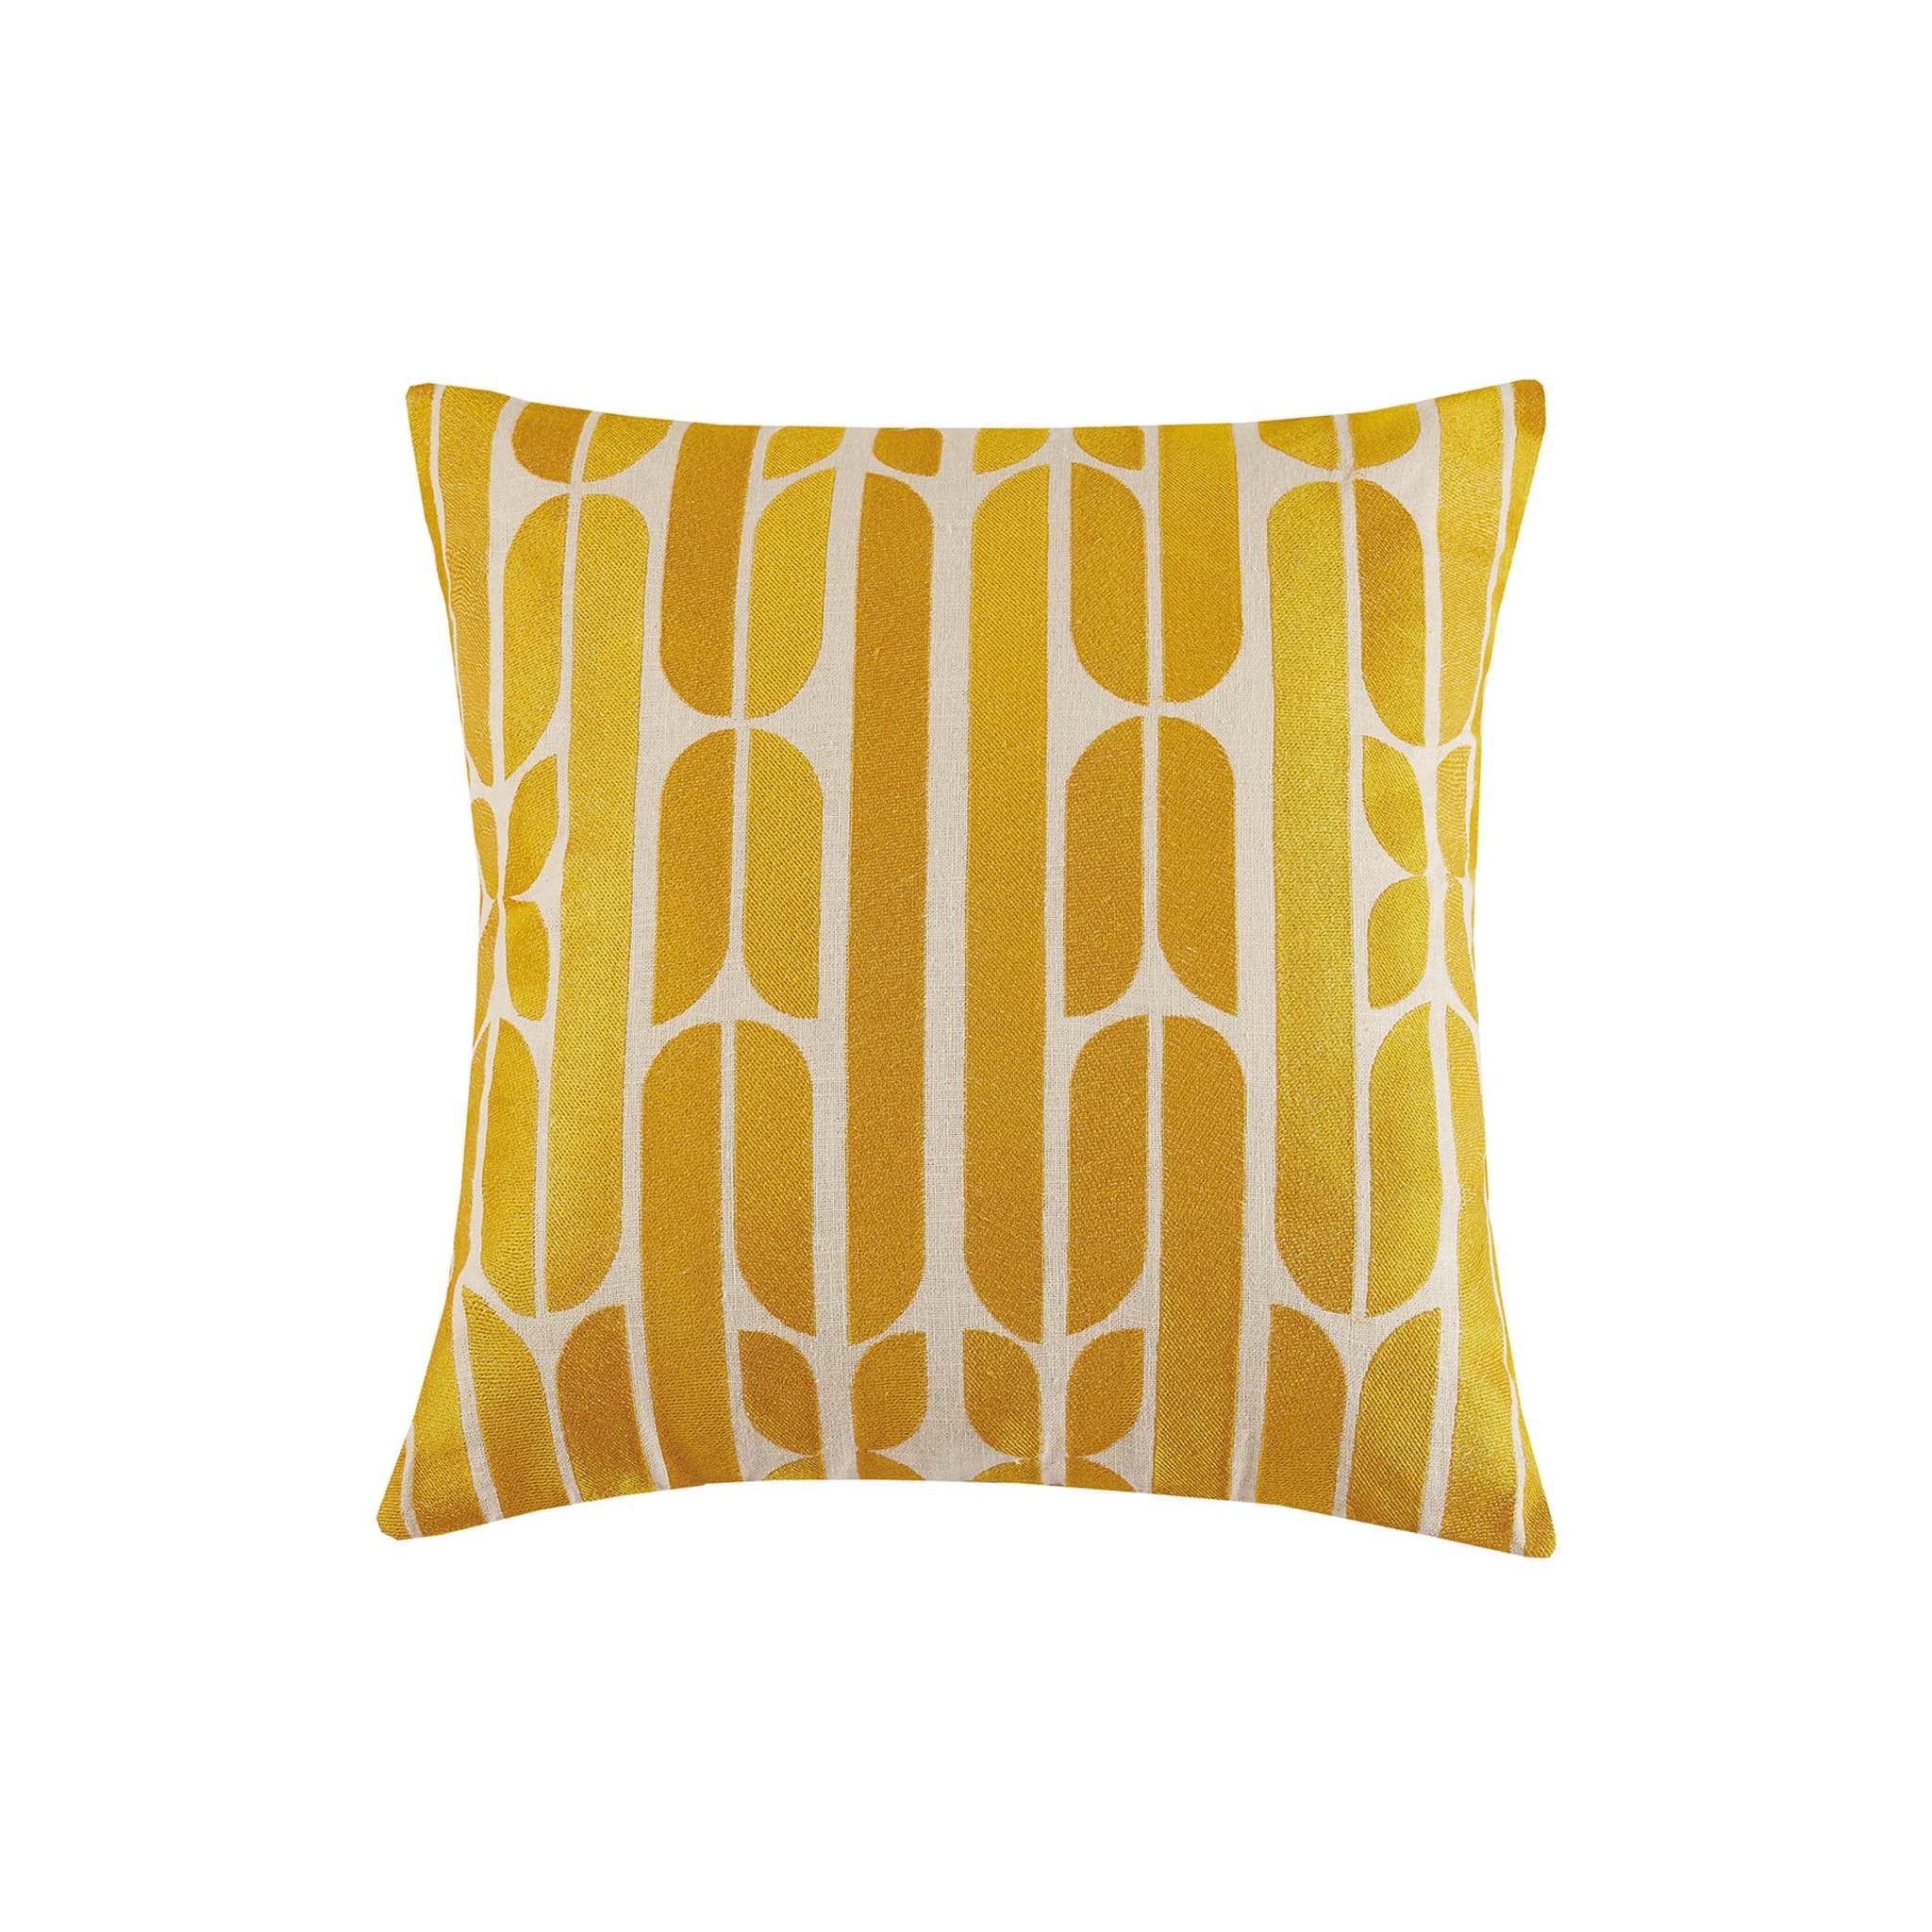 Modern Palm Print Pillow in Gold Embroidered Pillow